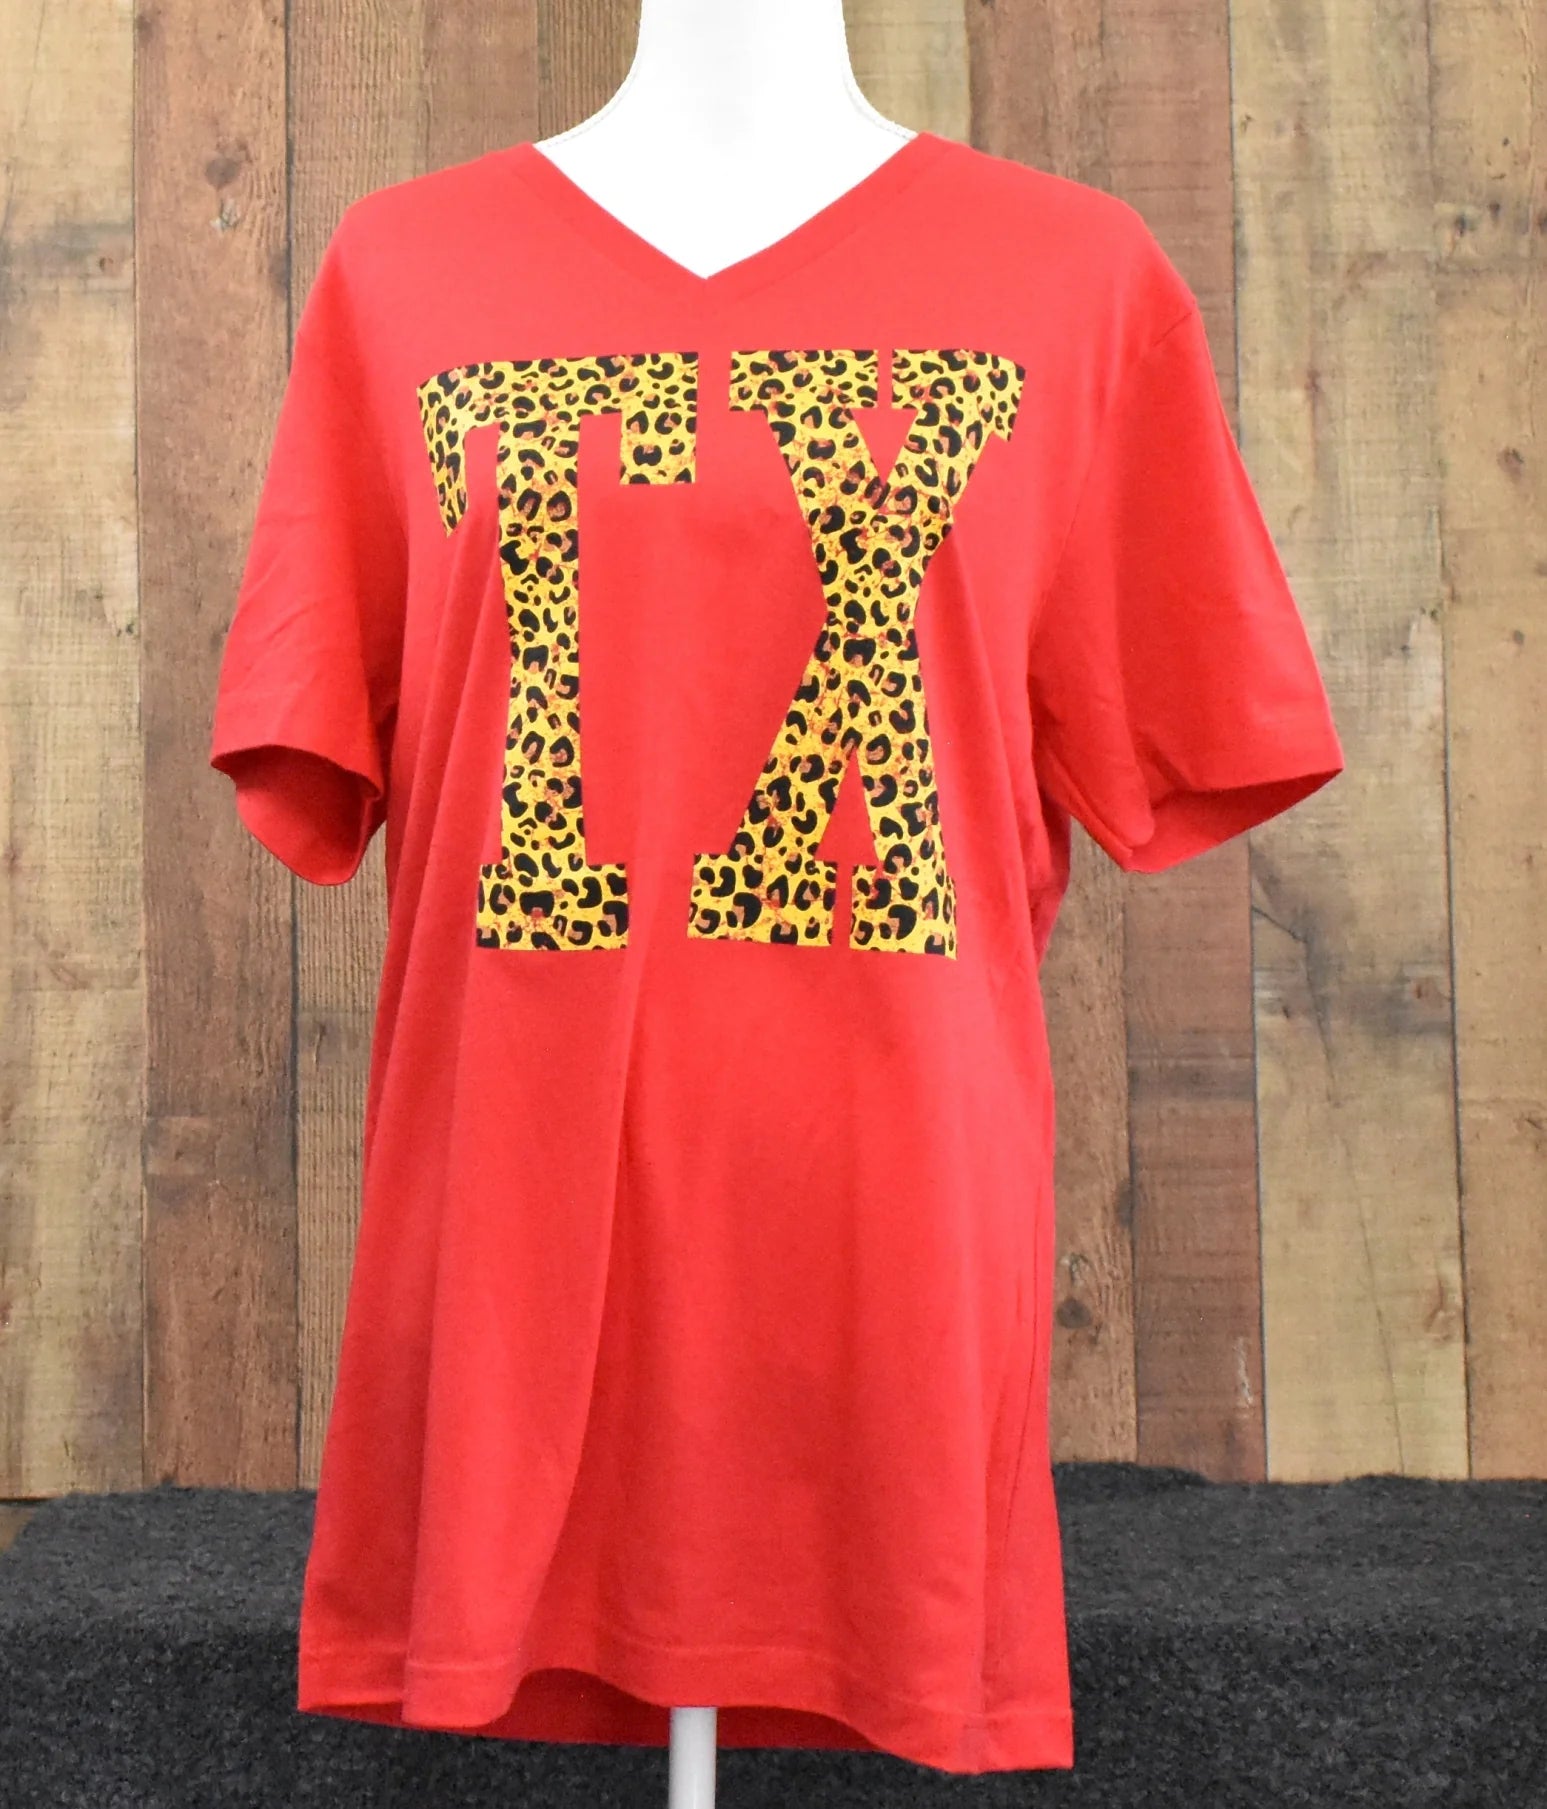 SALE Sassy Frass Texas Leopard State Canvas Bright Girlie T Shirt